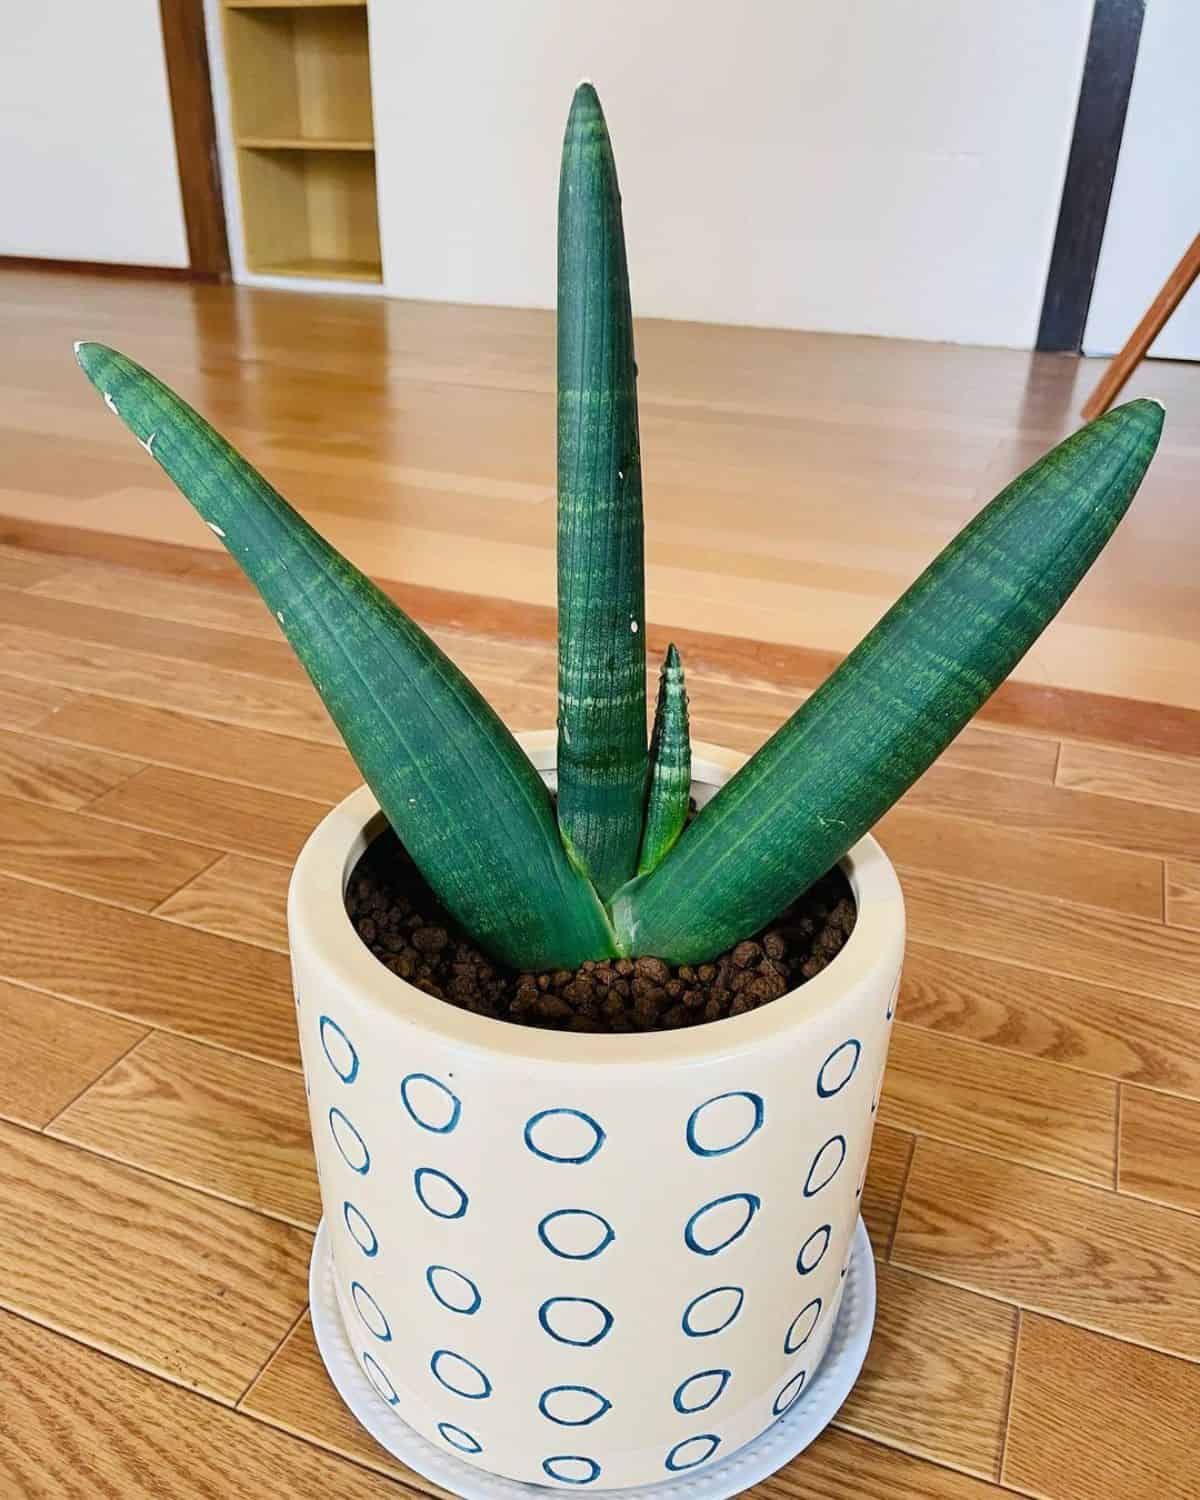 Sansevieria Obake grows in a clay pot on a floor.